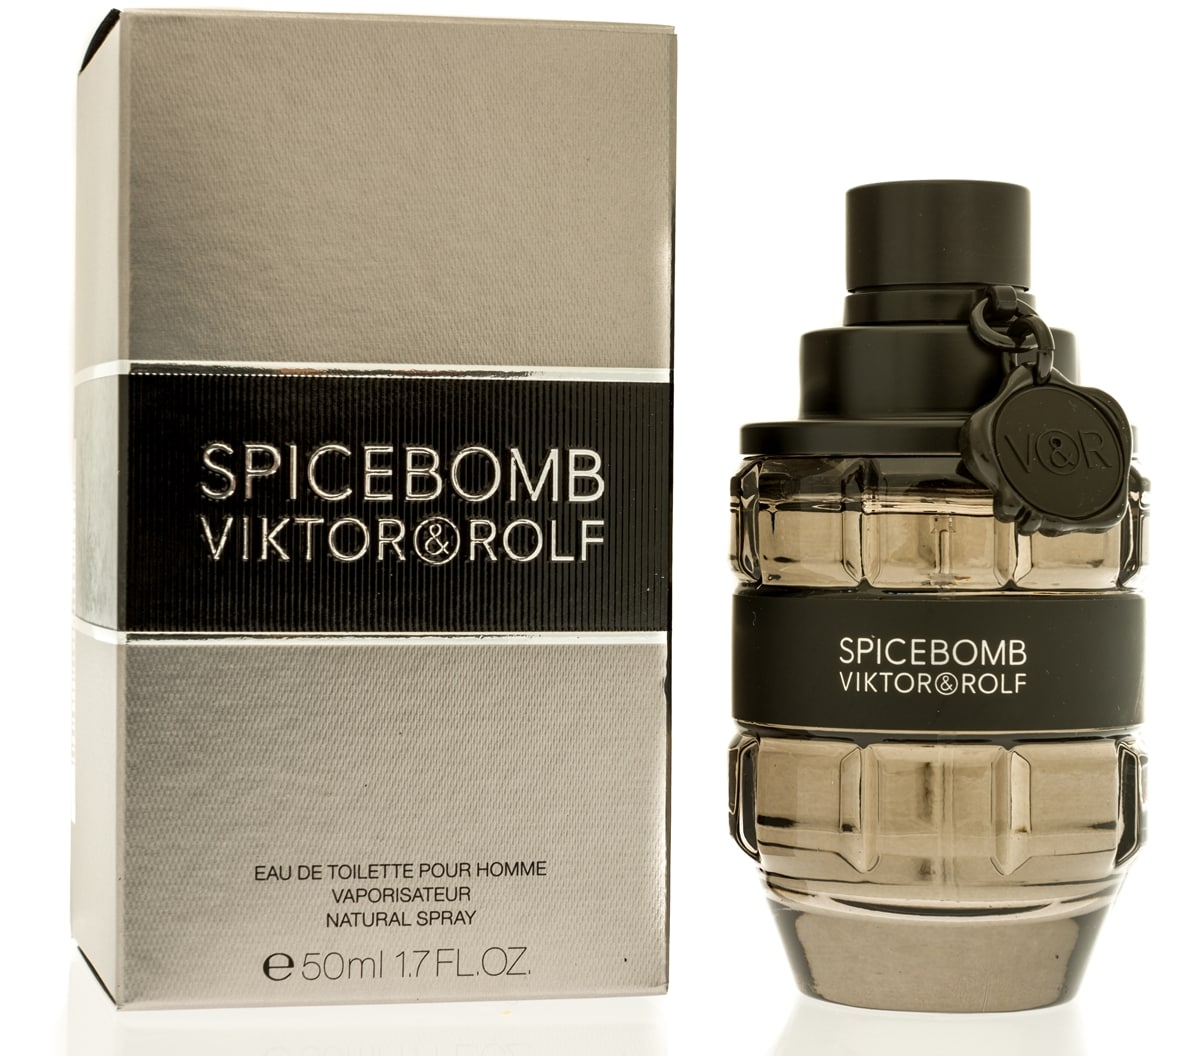 Spicebomb by Viktor & Rolf is a popular fragrance for men that was launched in 2012